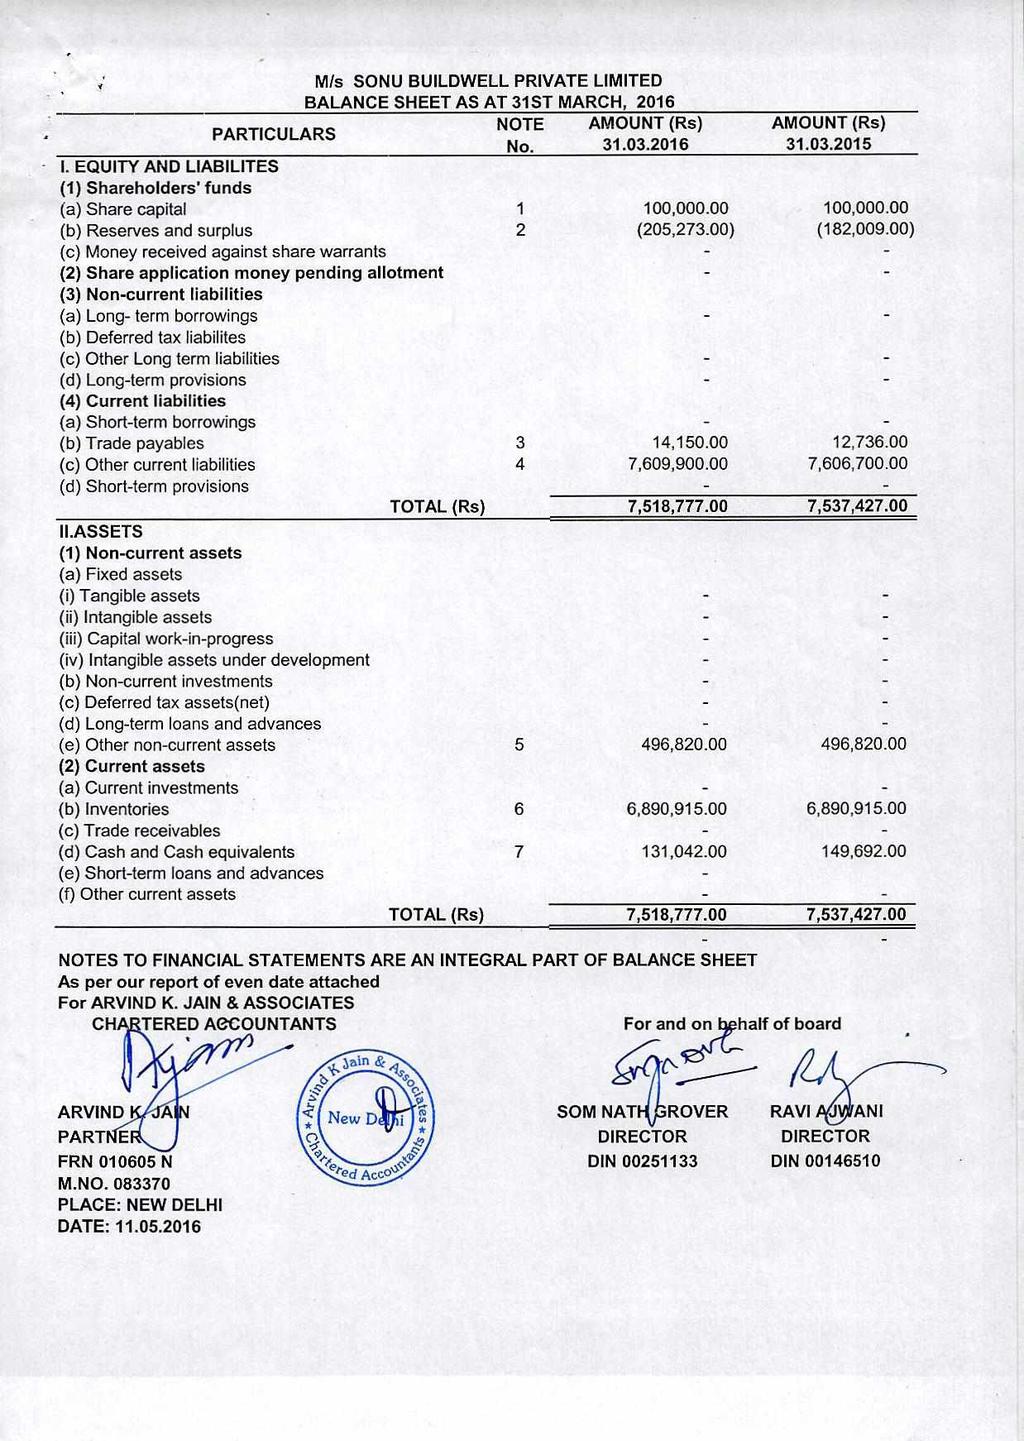 PARTICULARS Mis SONU BUILDWELL PRIVATE LIMITED BALANCE SHEET AS AT 31ST MARCH, 2016 NOTE AMOUNT (Rs) No. 31.03.2016 AMOUNT (Rs) 31.03.2015 I.